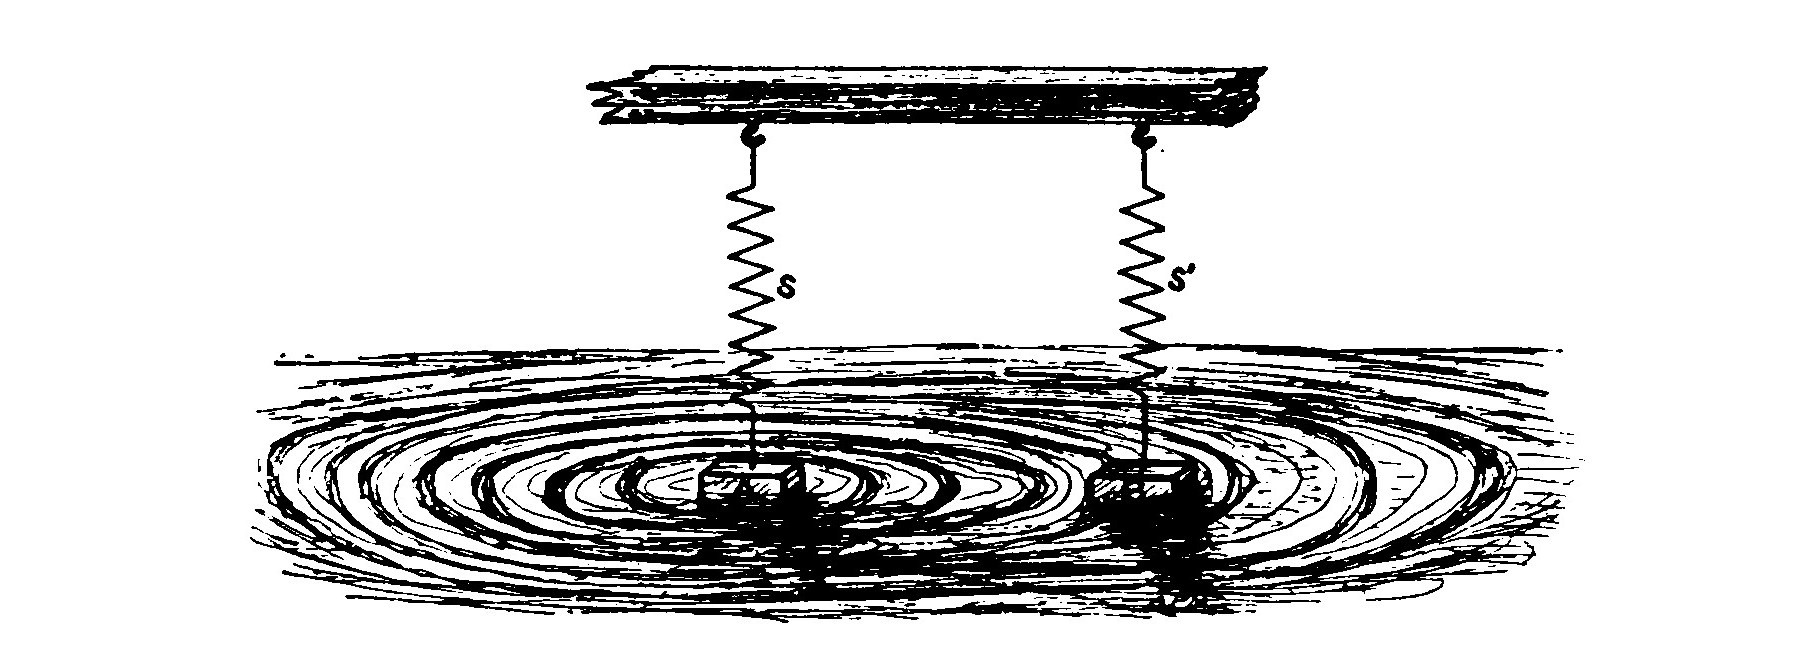 Fig. 8. Tuned Hydraulic Transmitter and Receptor.